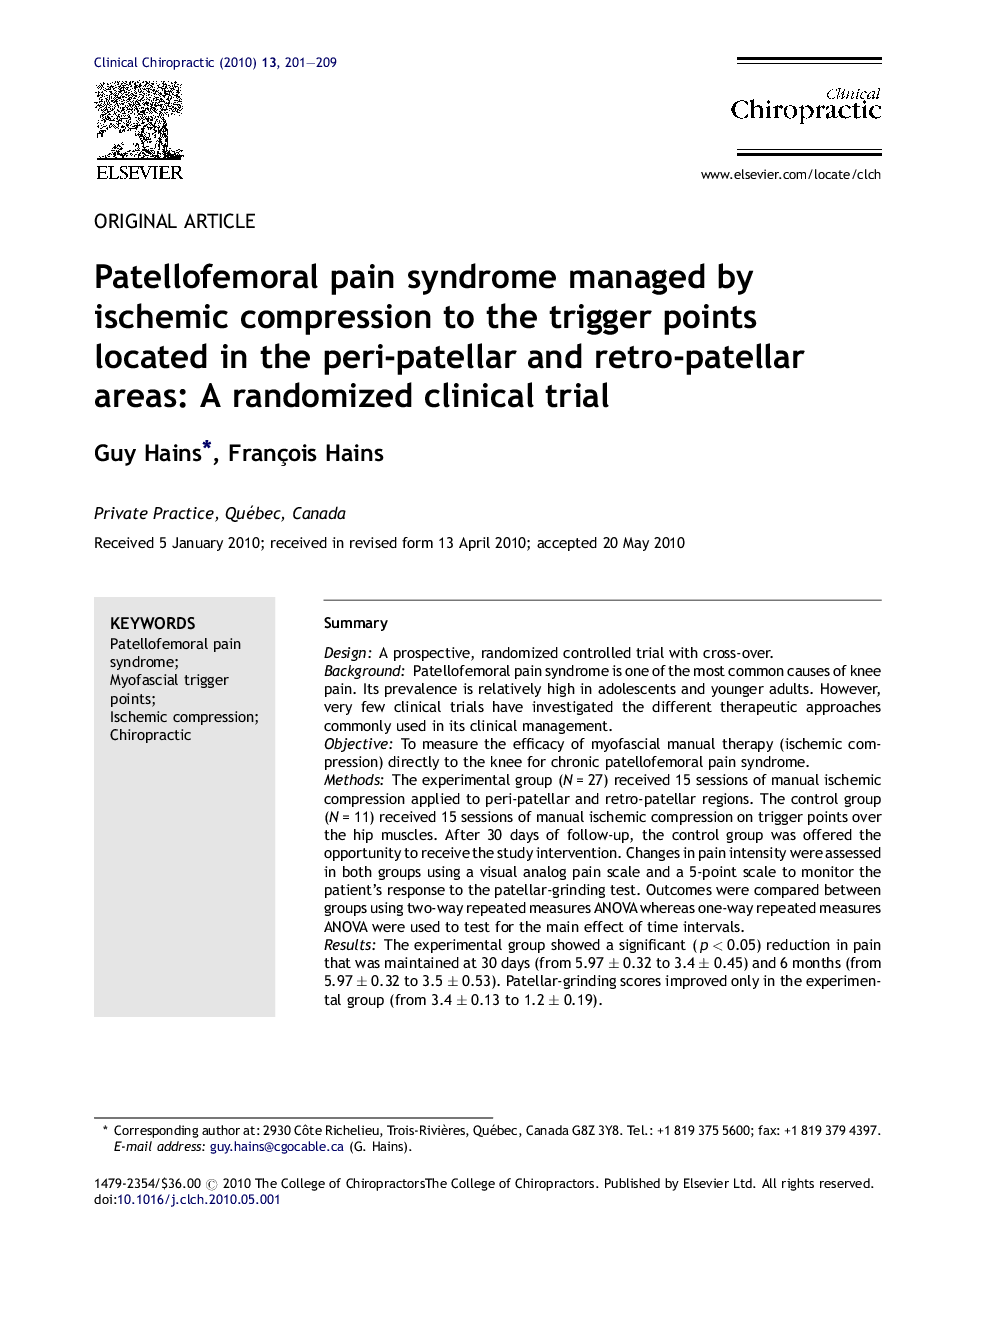 Patellofemoral pain syndrome managed by ischemic compression to the trigger points located in the peri-patellar and retro-patellar areas: A randomized clinical trial